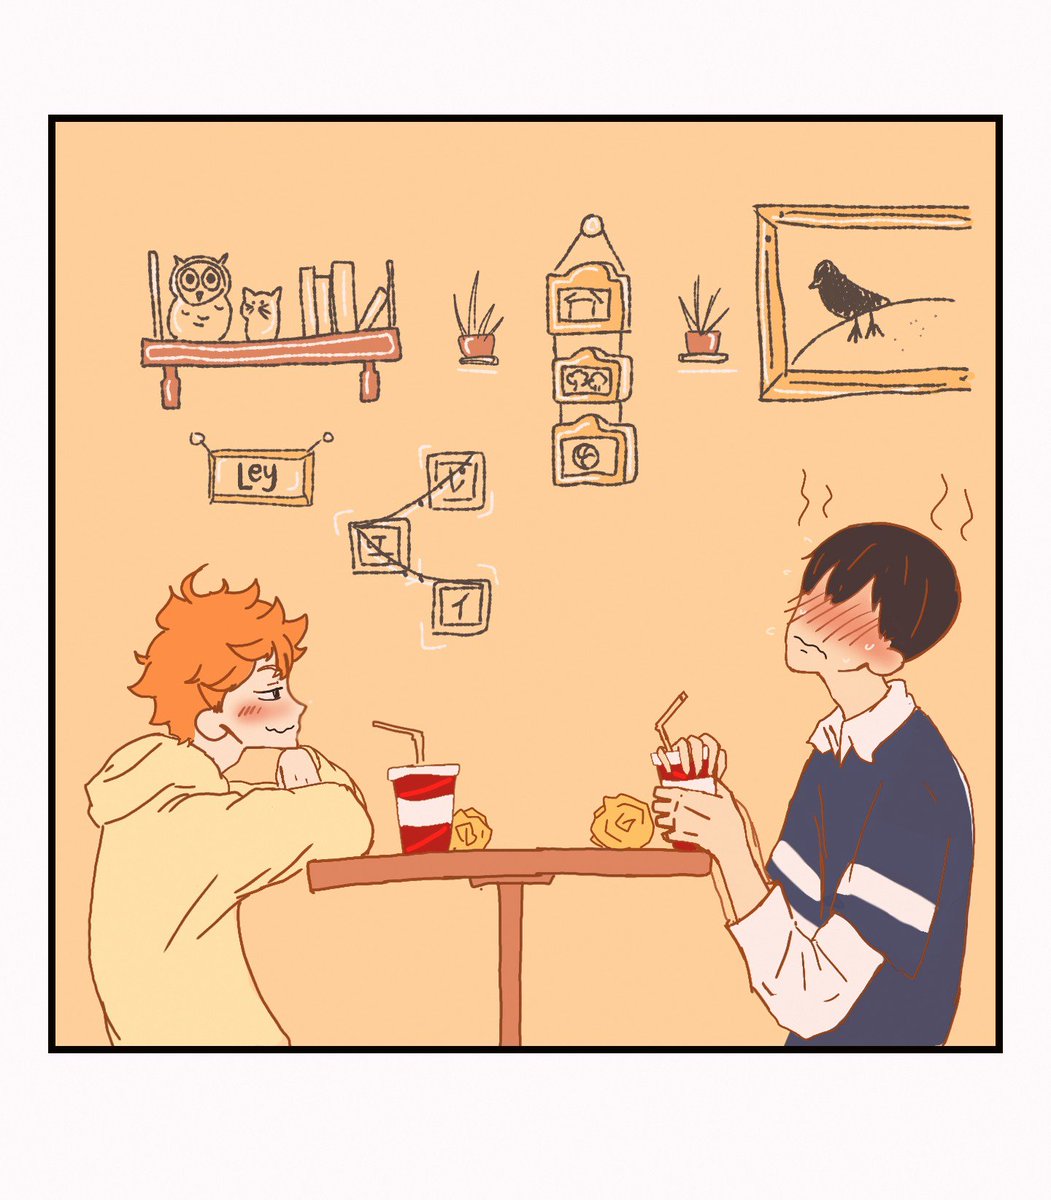 classes suspended means i have time to draw kagehina 

// power of staring // 